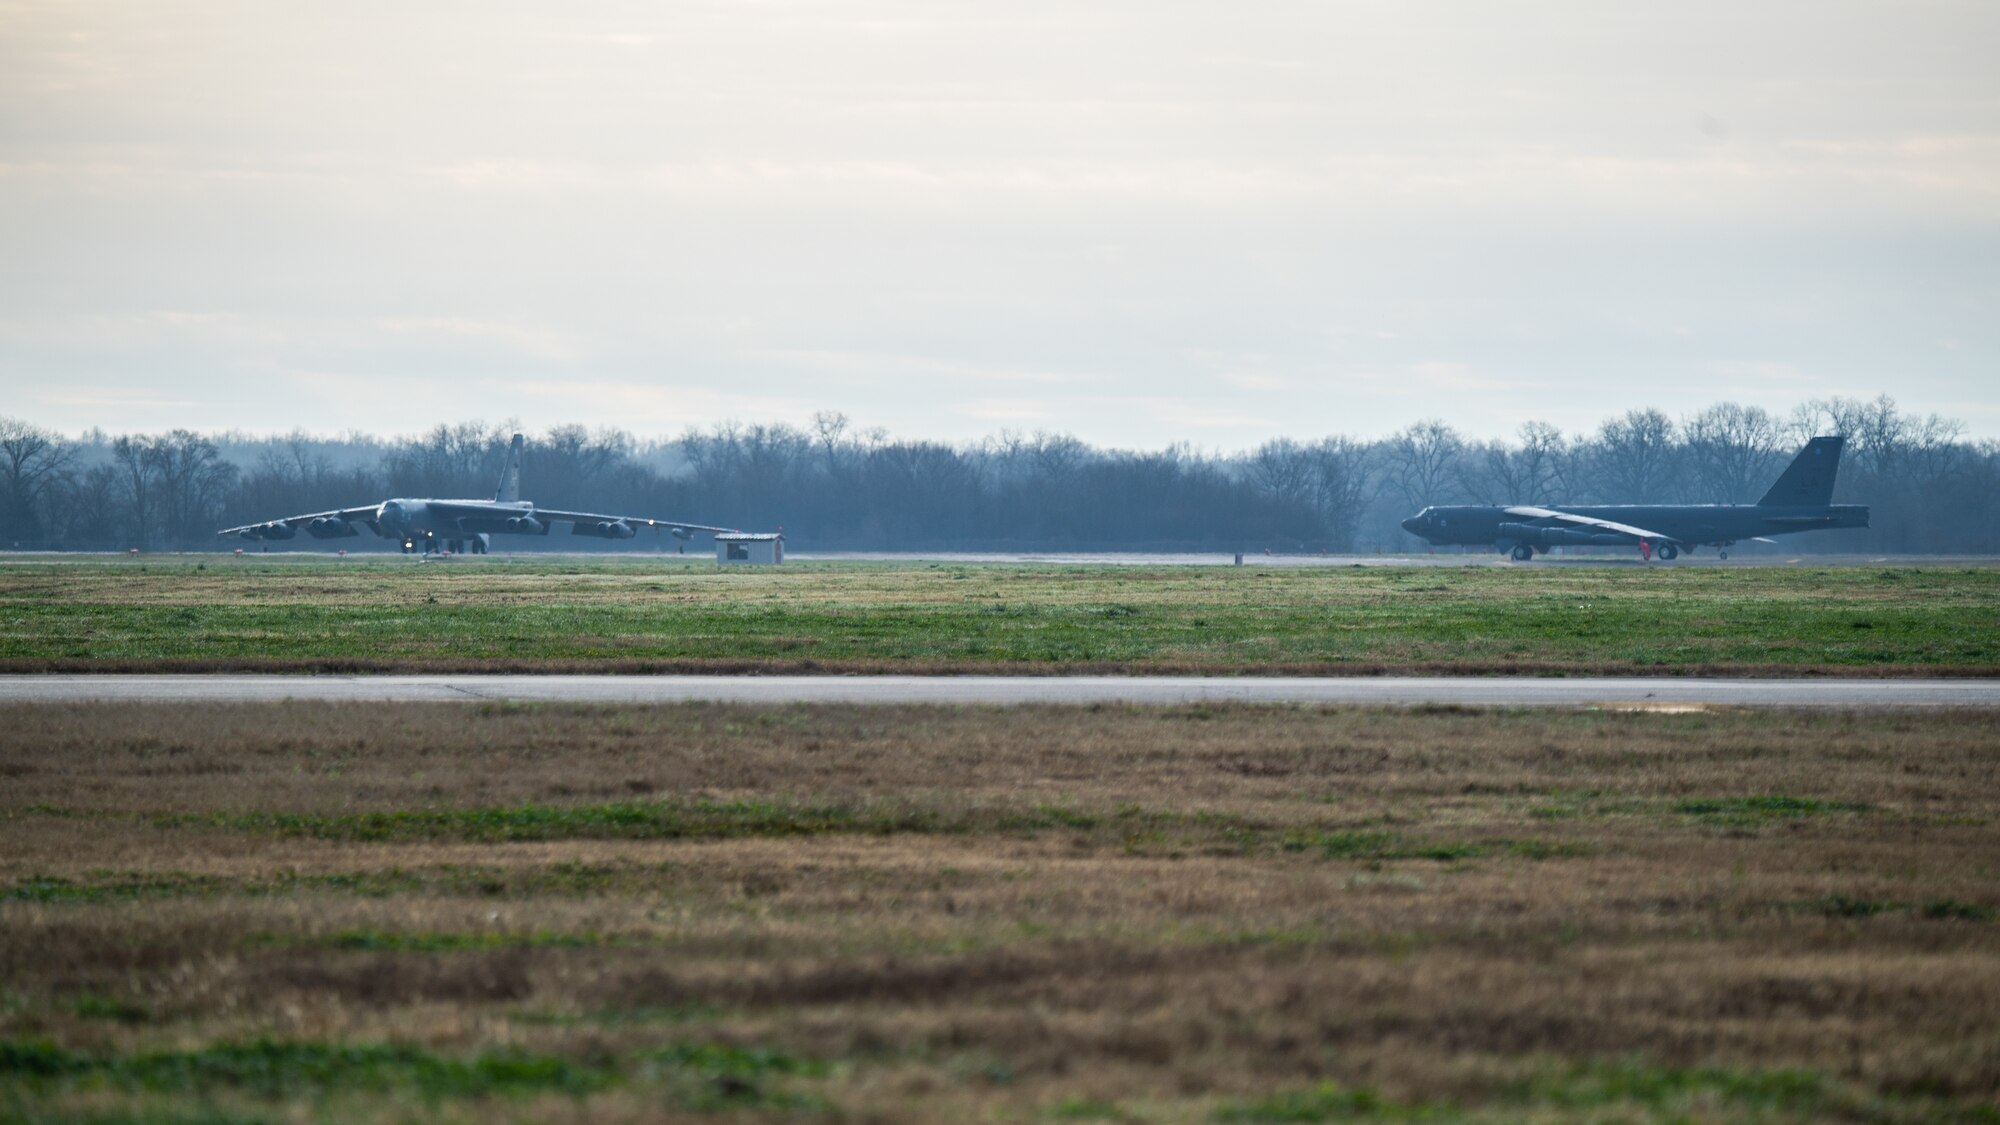 U.S. Air Force B-52 Stratofortress' take off from Barksdale Air Force Base, LA, during a bomber task force mission over the U.S. Central Command area of responsibility, Jan. 26, 2021. The bomber deployment underscores the U.S. Military's commitment to regional security and demonstrates a unique ability to rapidly deploy on short notice. The B-52 is a long-range, heavy bomber that is capable of flying at high subsonic speeds of altitudes of up to 50,000 feet and provides the United States with a global strike capability.